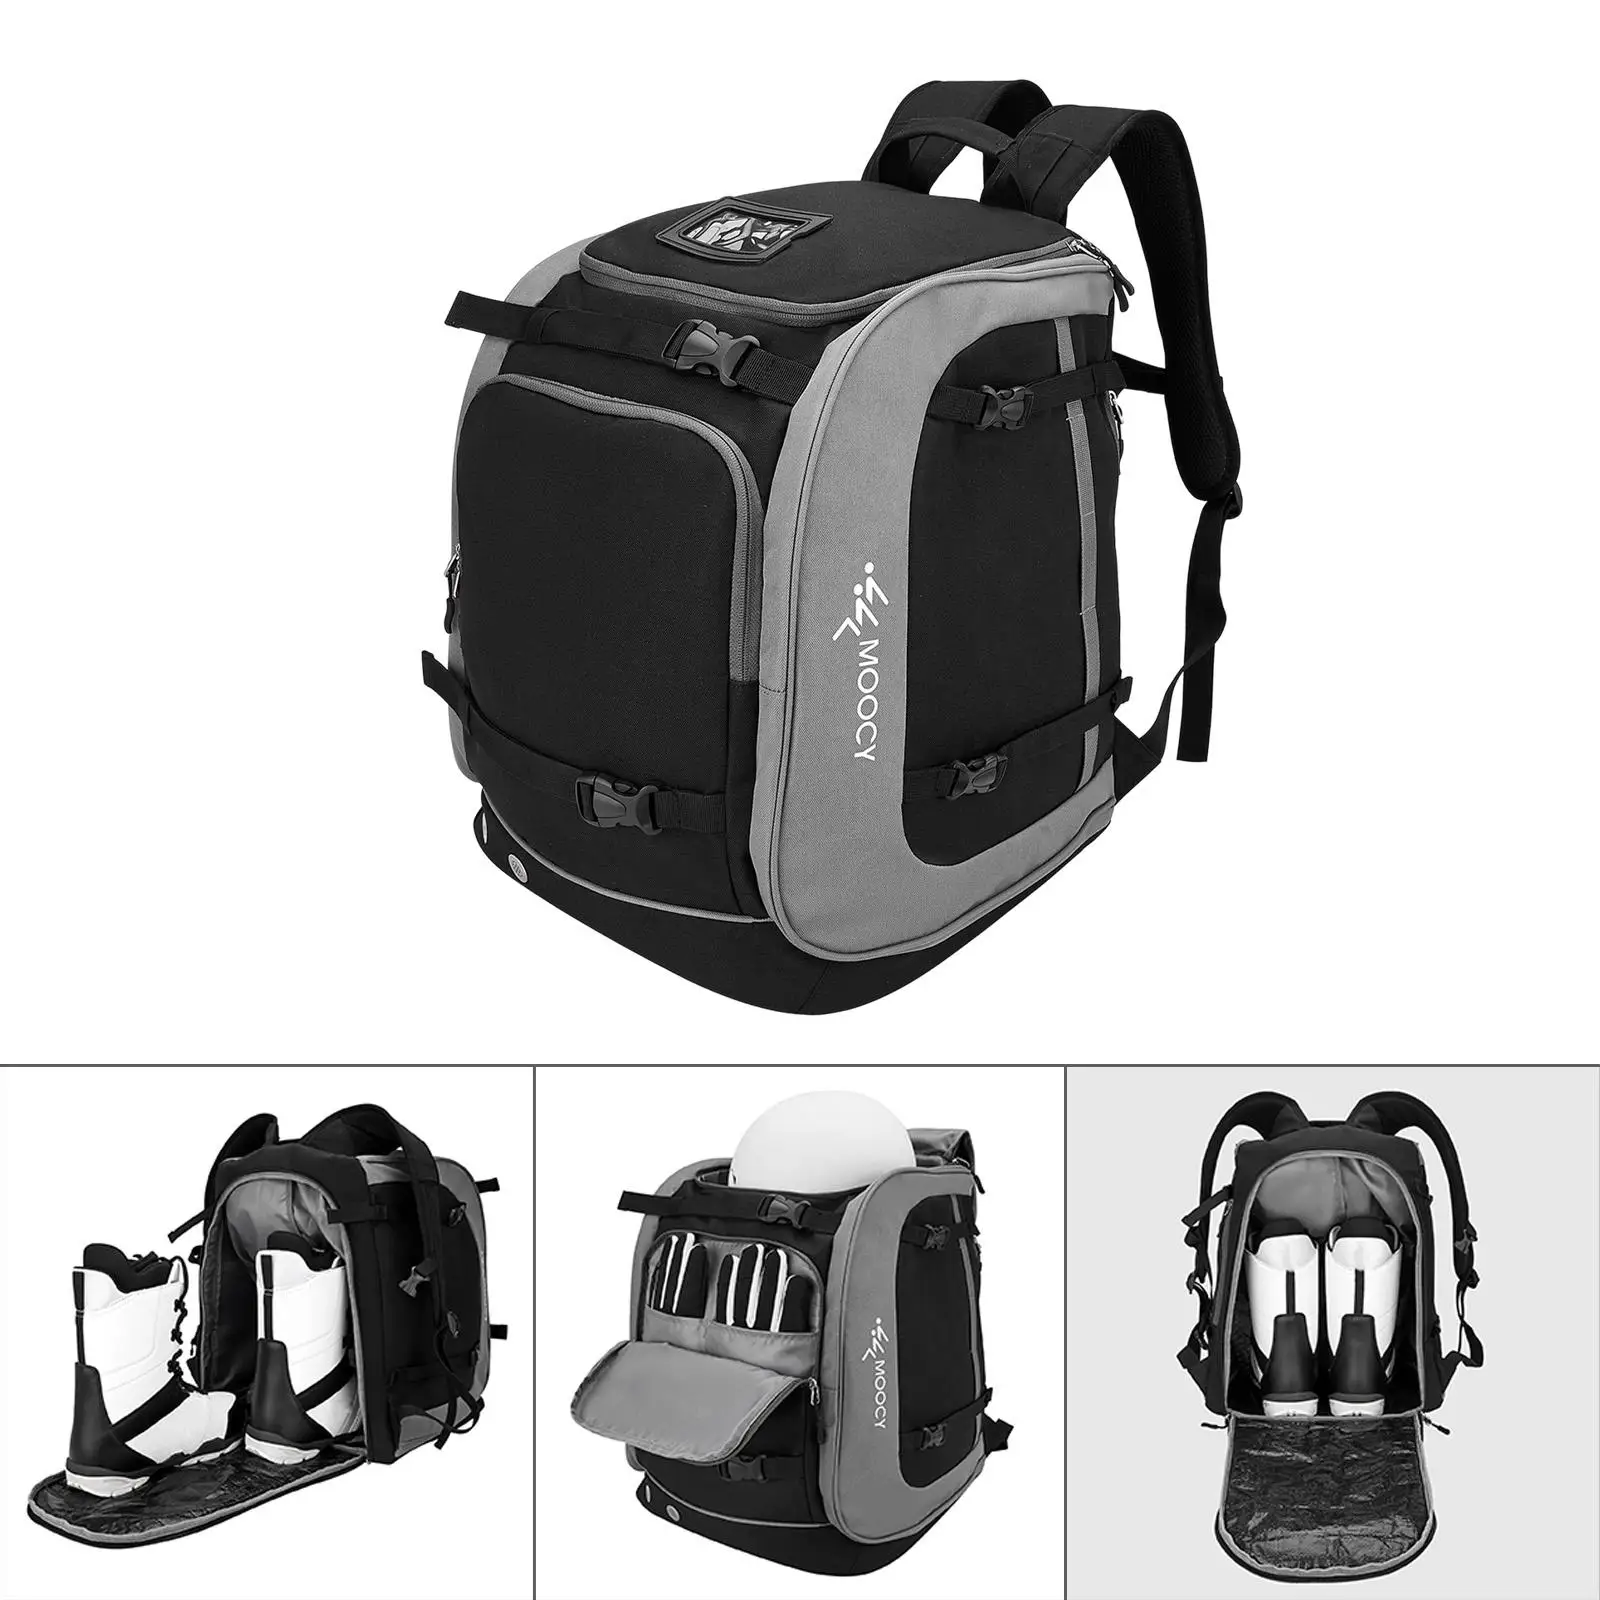 Durable 65L Ski Backpack Large Capacity Carrying Storage Bag Oxford Cloth Compartments for Outdoor Travel Skis Air Travel Gloves